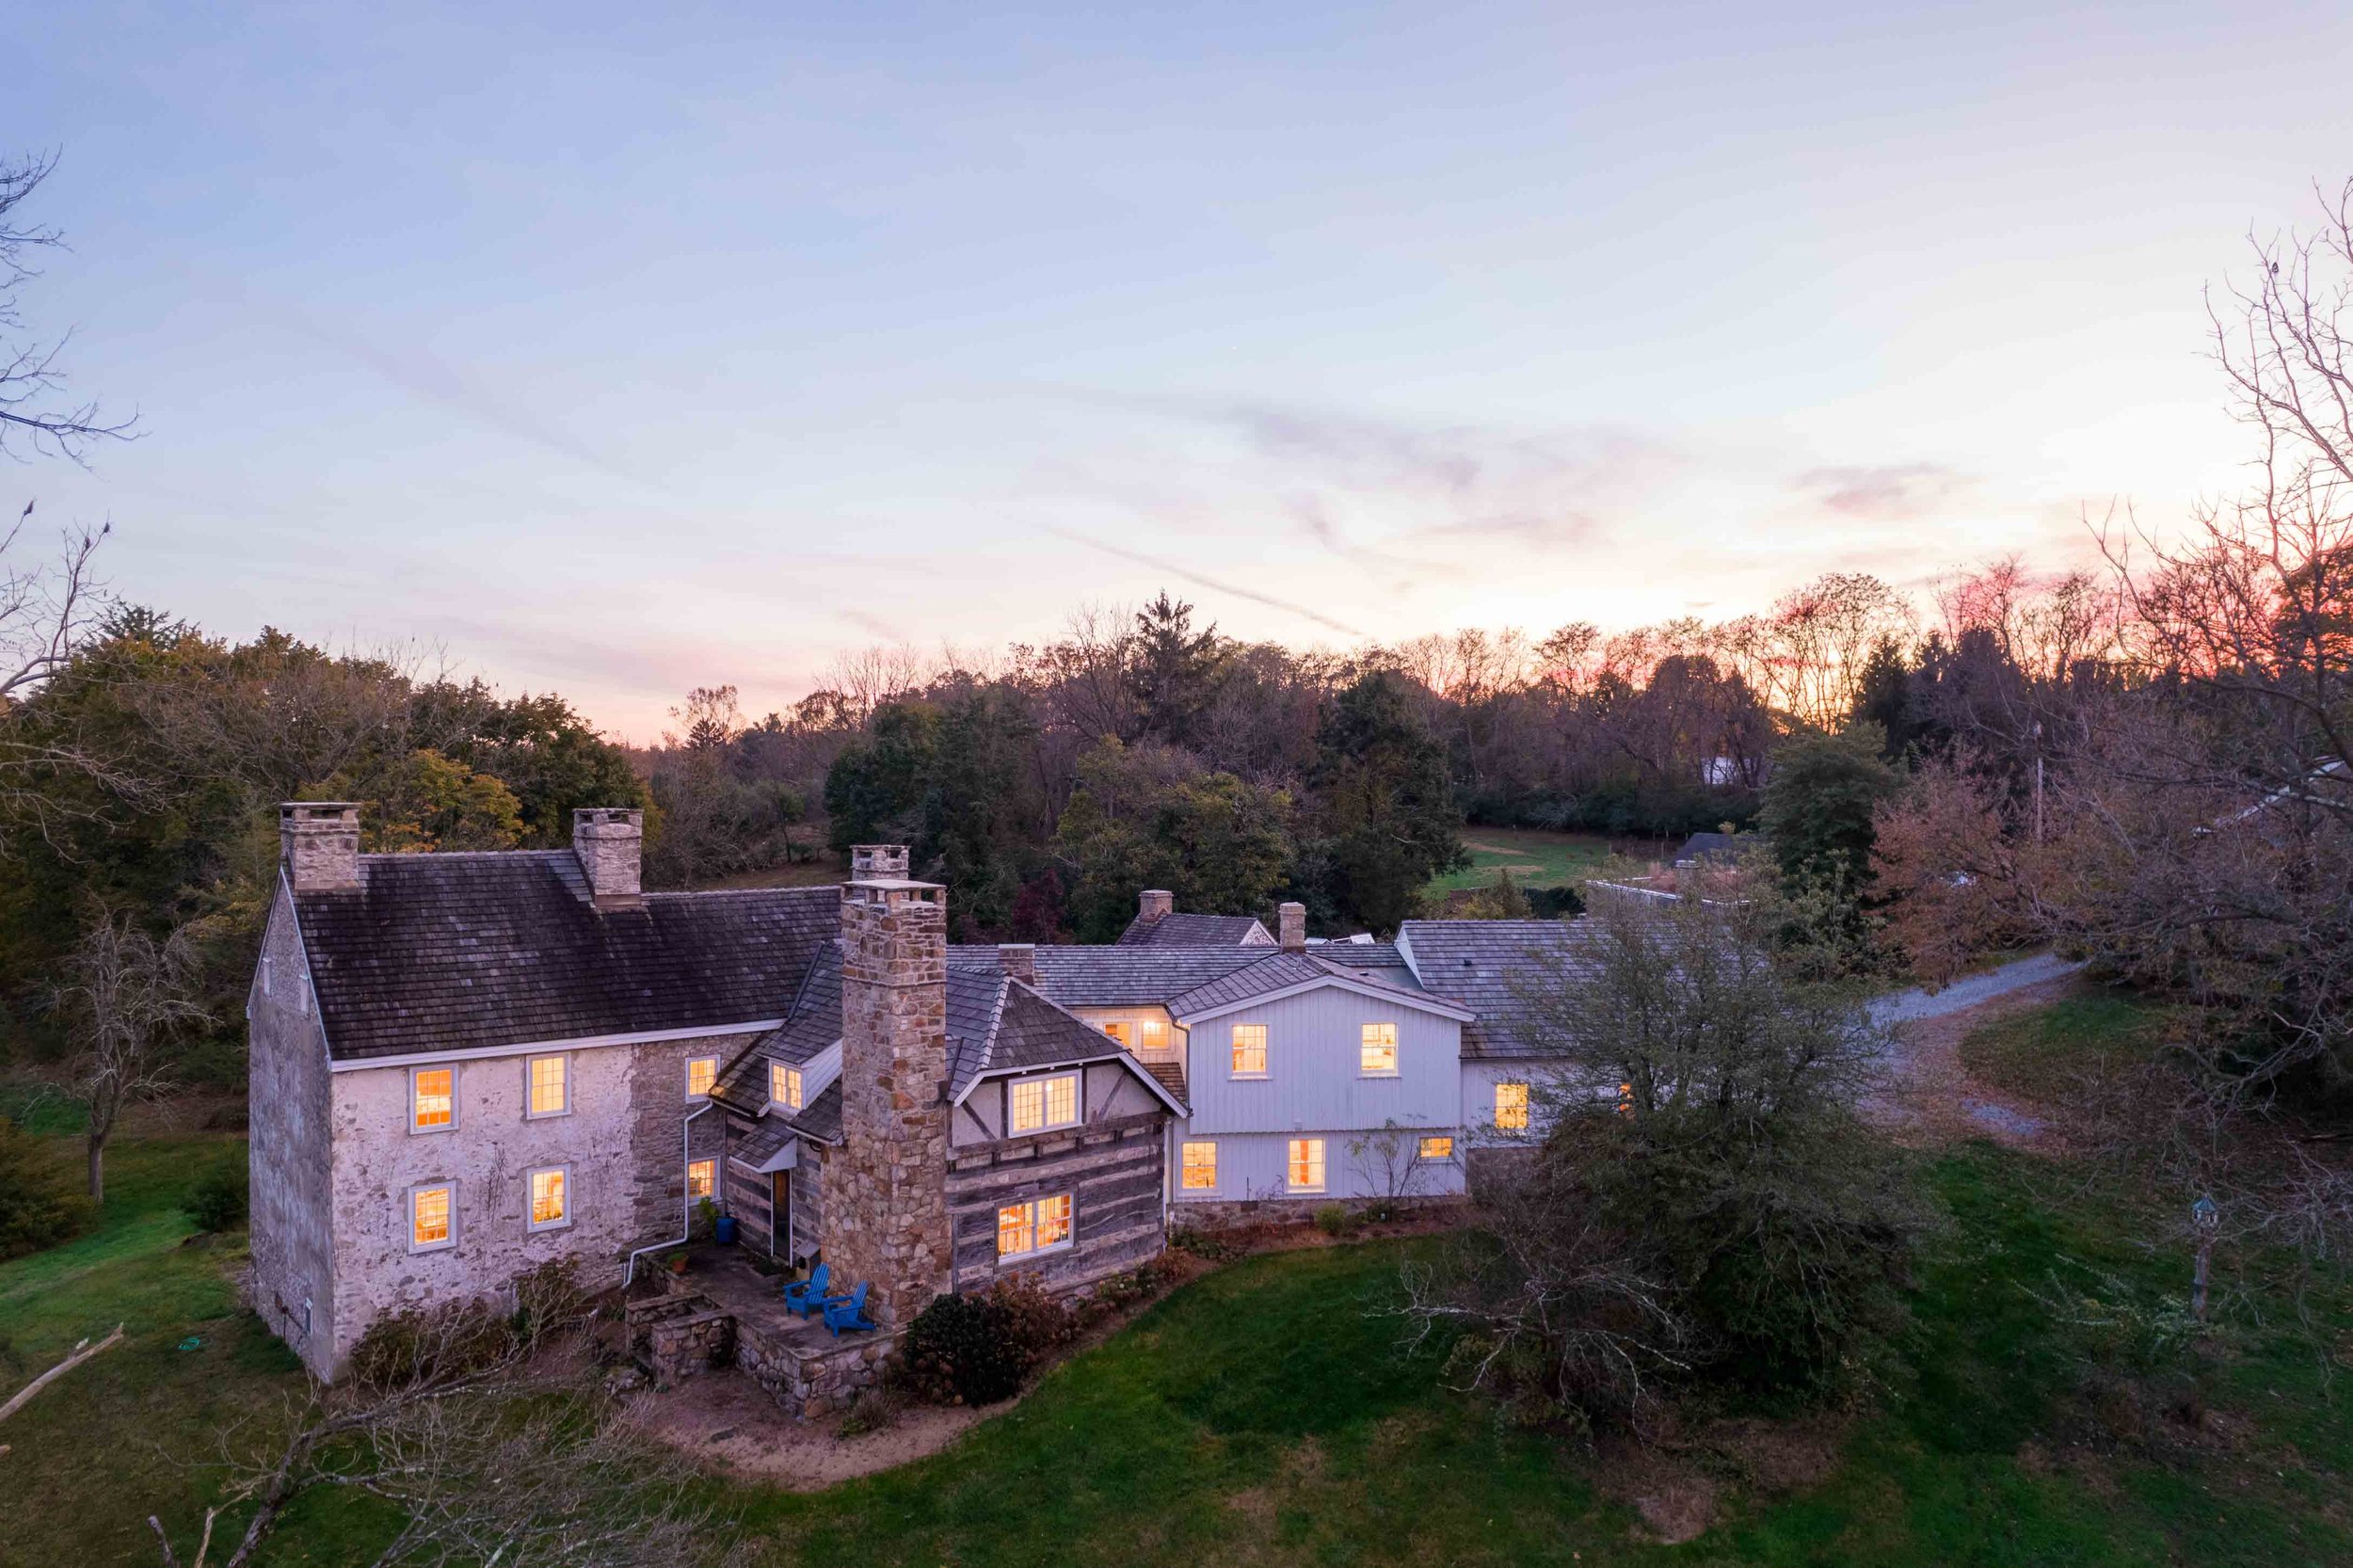  Elements of the main home were initially built from field stone found on the property. The new owners continued this tradition, unearthing local stones. They were then checked for quality by the stone mason and added to the base of the house, hallwa